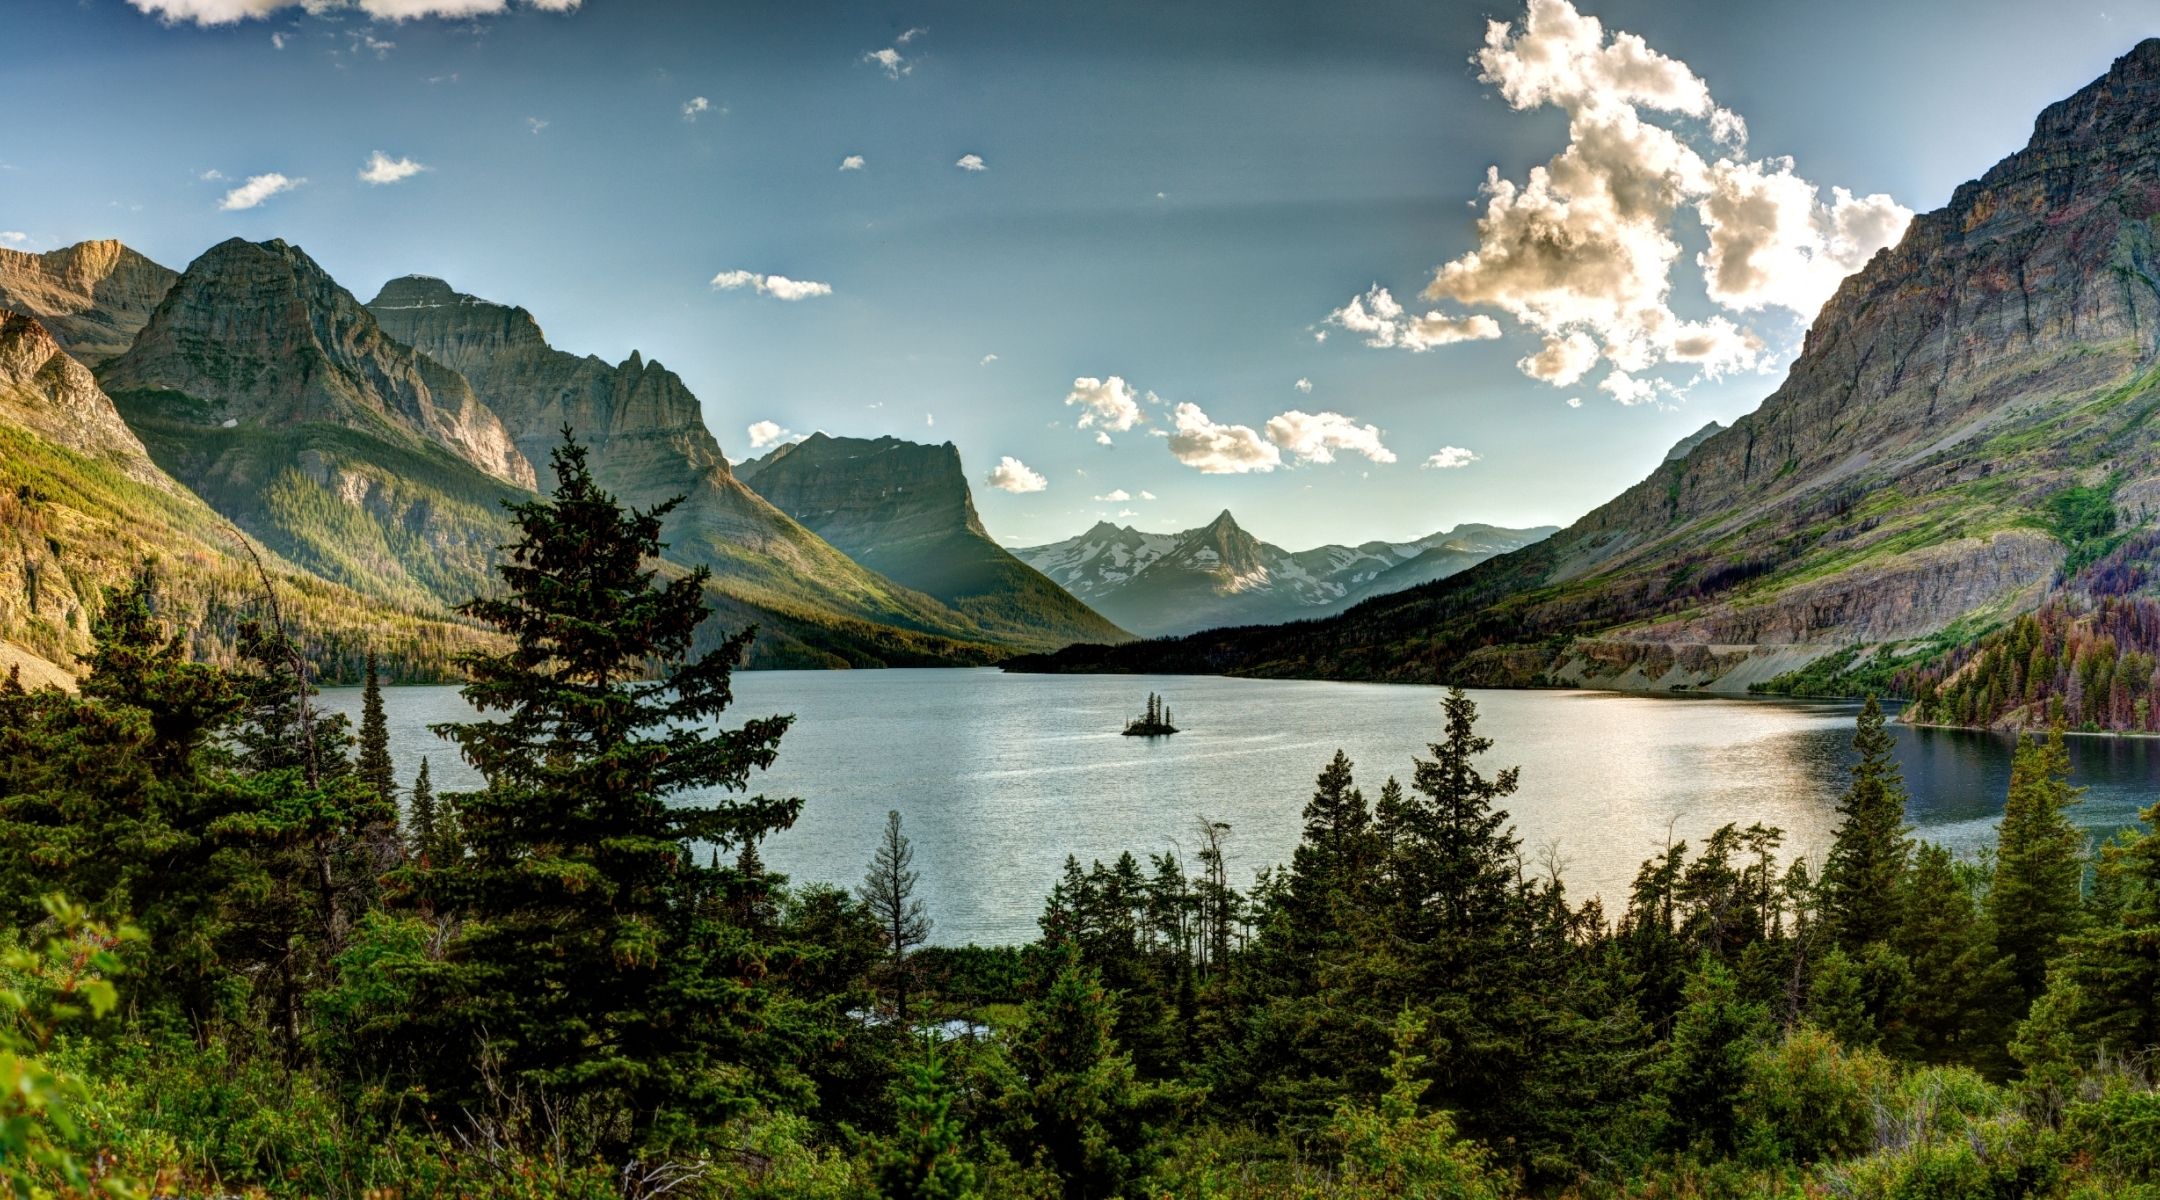 View of a mountain lake in Montana